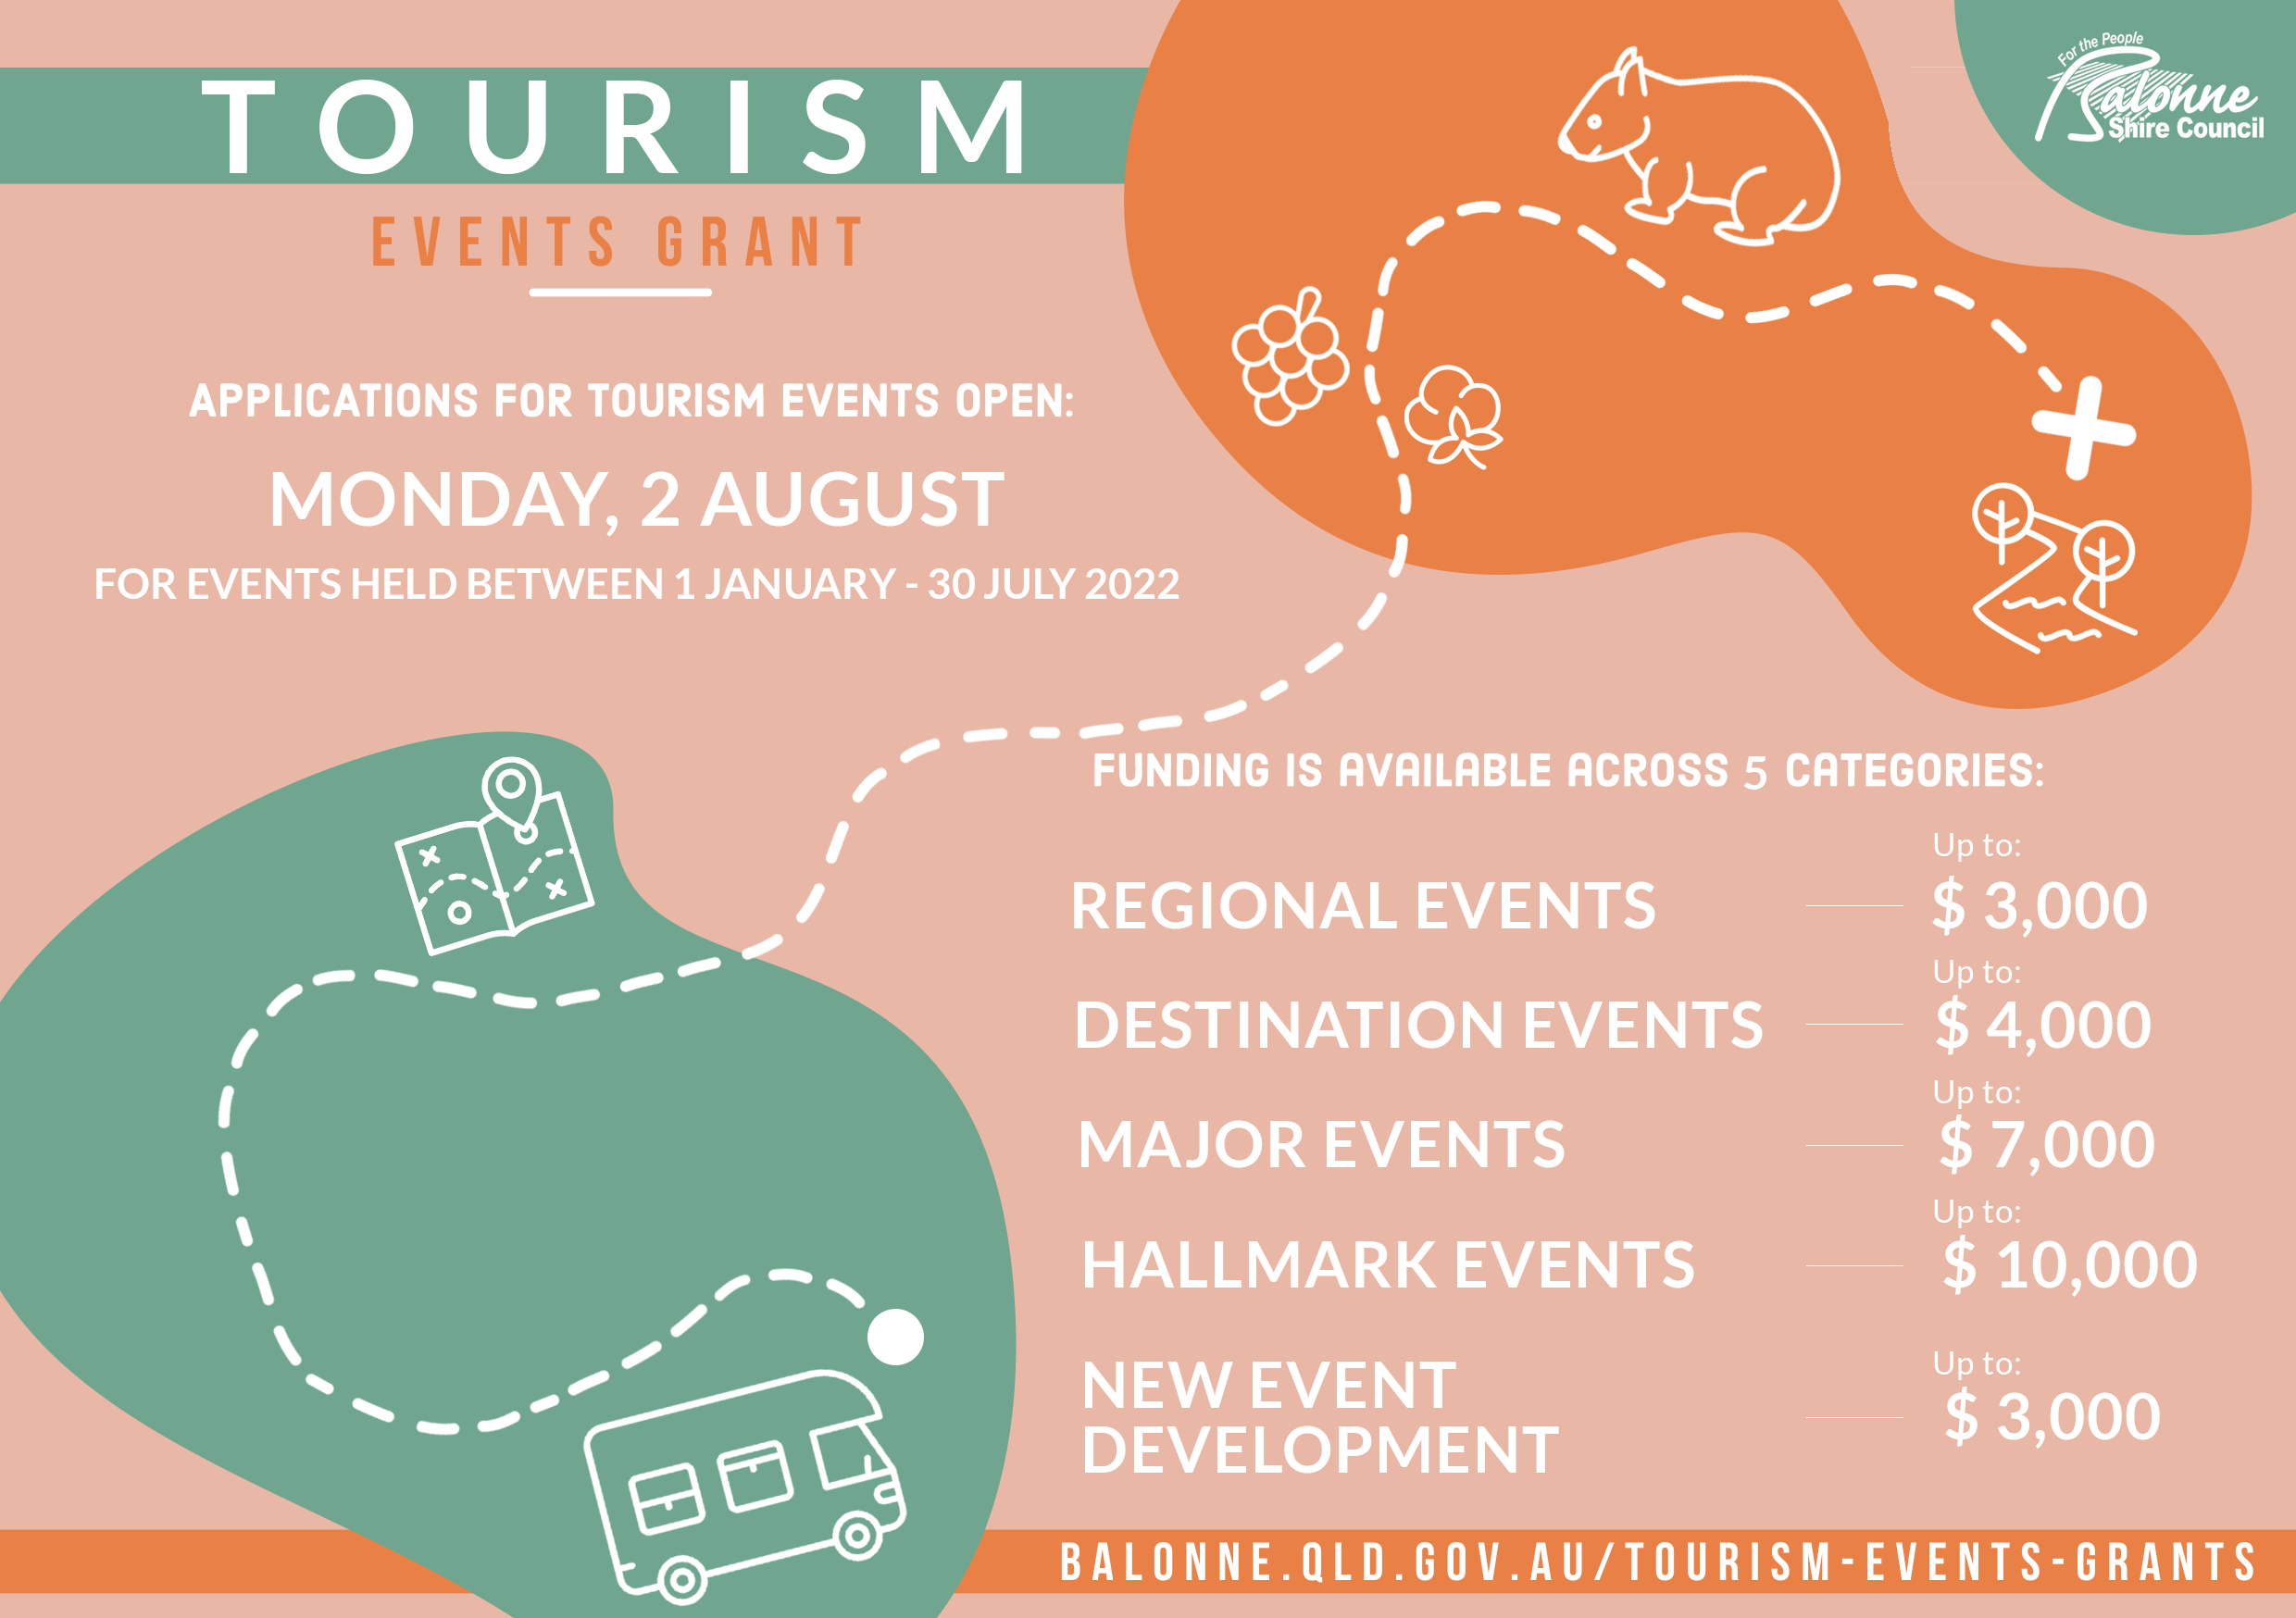 Tourism Events Grant. Applications open Monday 2 August, for events held between 1 January and 30 July 2022. Funding is available across five categories.